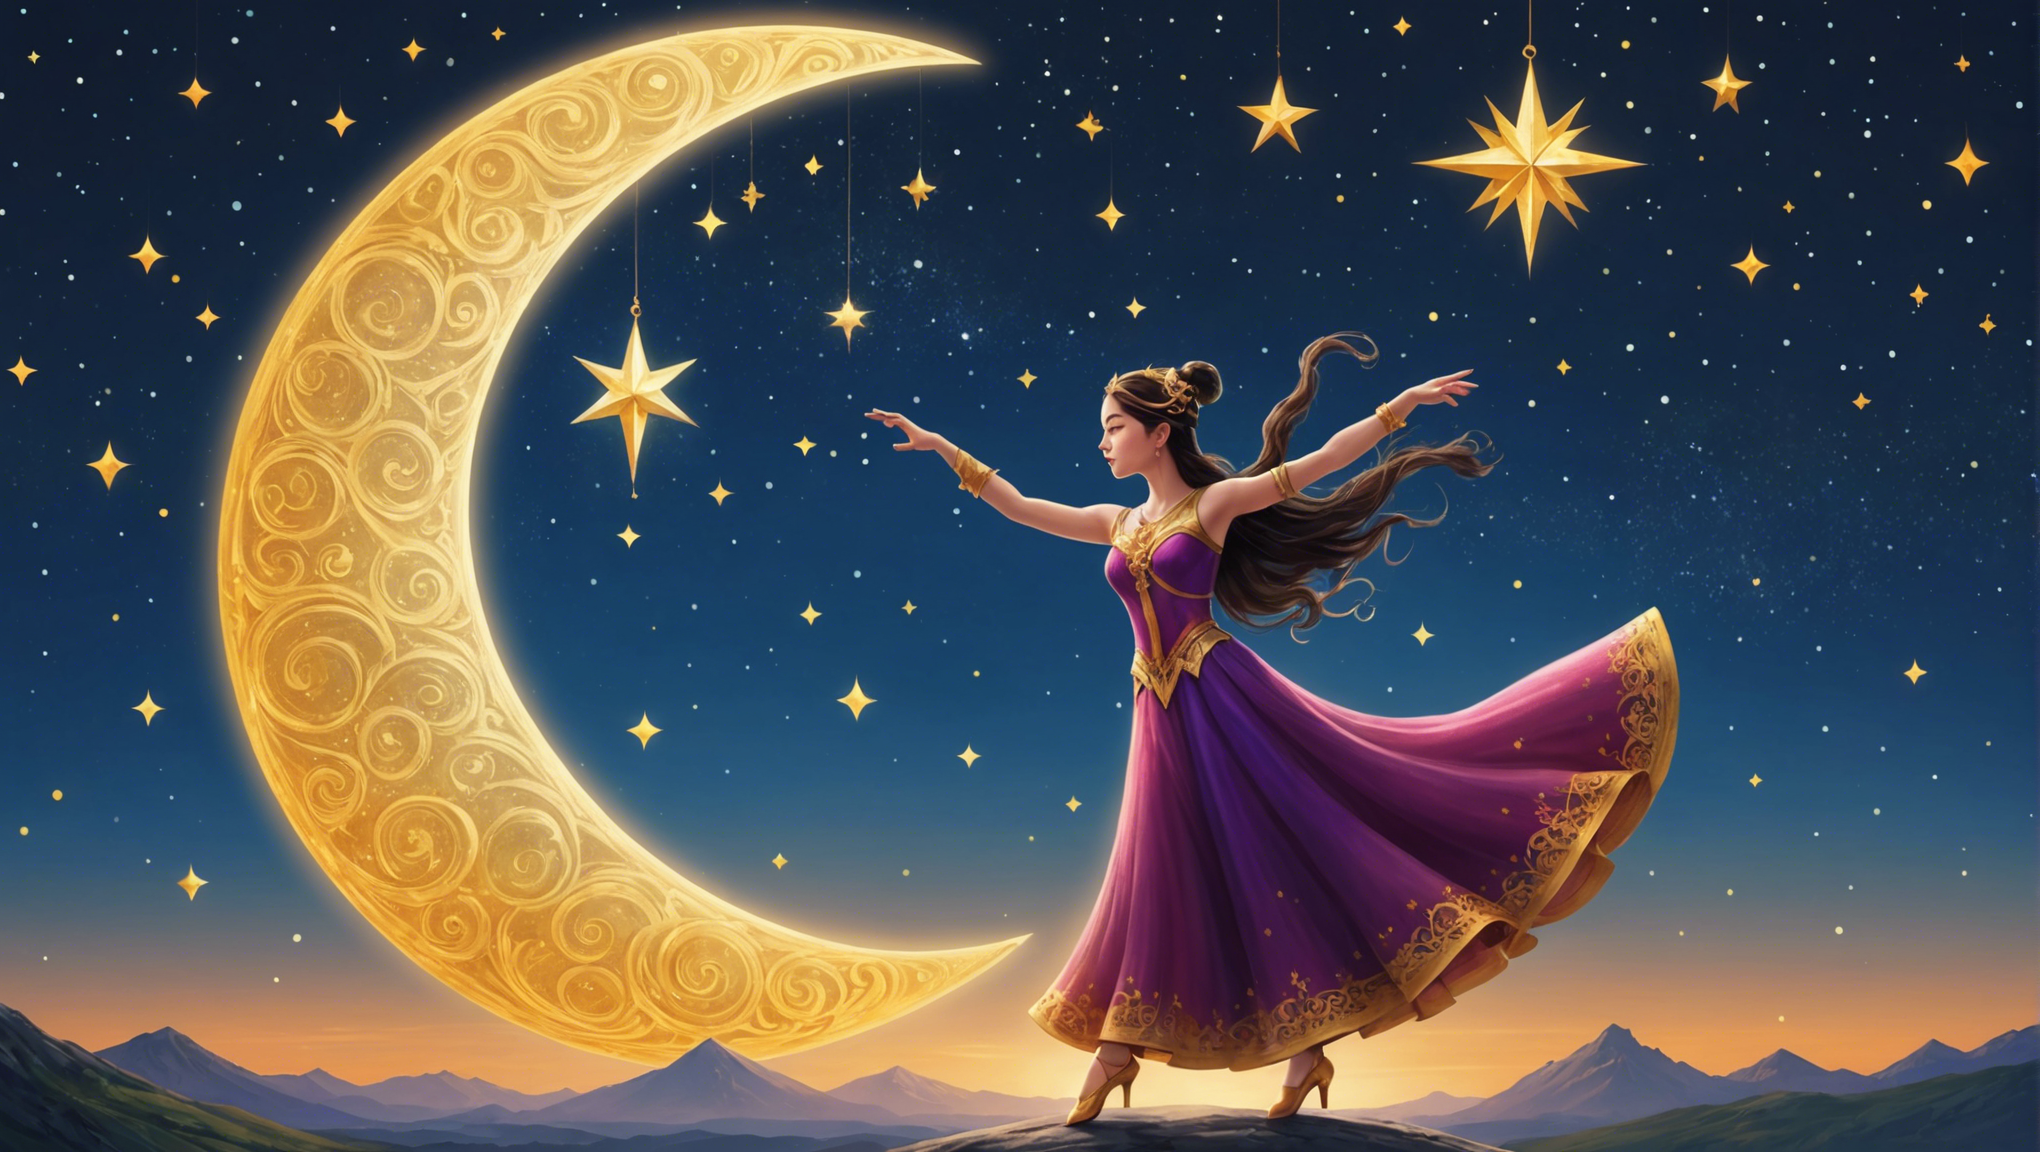 discover the captivating secrets hidden within the mesmerizing dance of the star moon and embark on a journey of enlightenment and wonder. uncover the wisdom and beauty of this celestial spectacle.